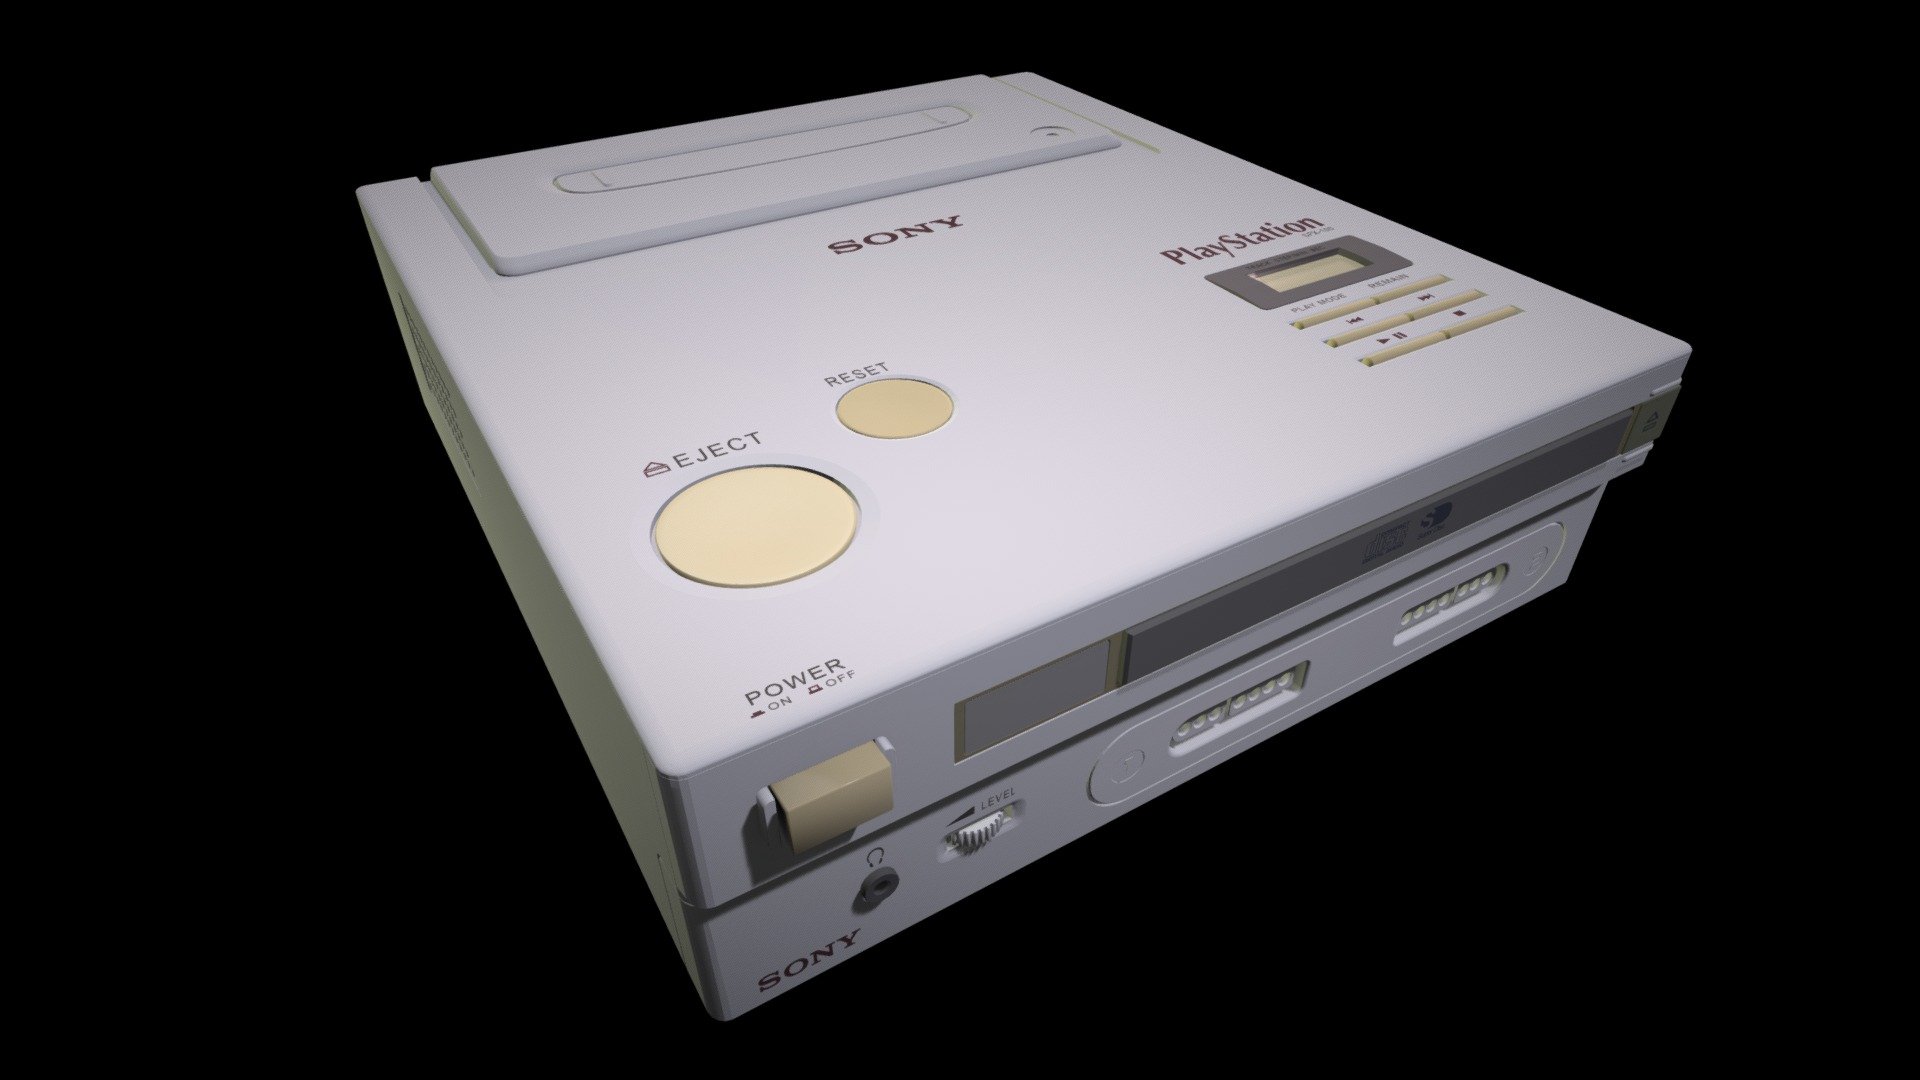 A model of the so called Nintendo Playstation. This video console was developed in a partnership between Nintendo and Sony but it was never released. The model is based on images of a prototype that was found in November 2015. Meanwhile the CD-ROM drive of the prototype has been repaired and homebrewn games have been developed. 
Take a look at the wikipedia article for more information about the console and the current development. This model is made for gaming historical documentation 3d model